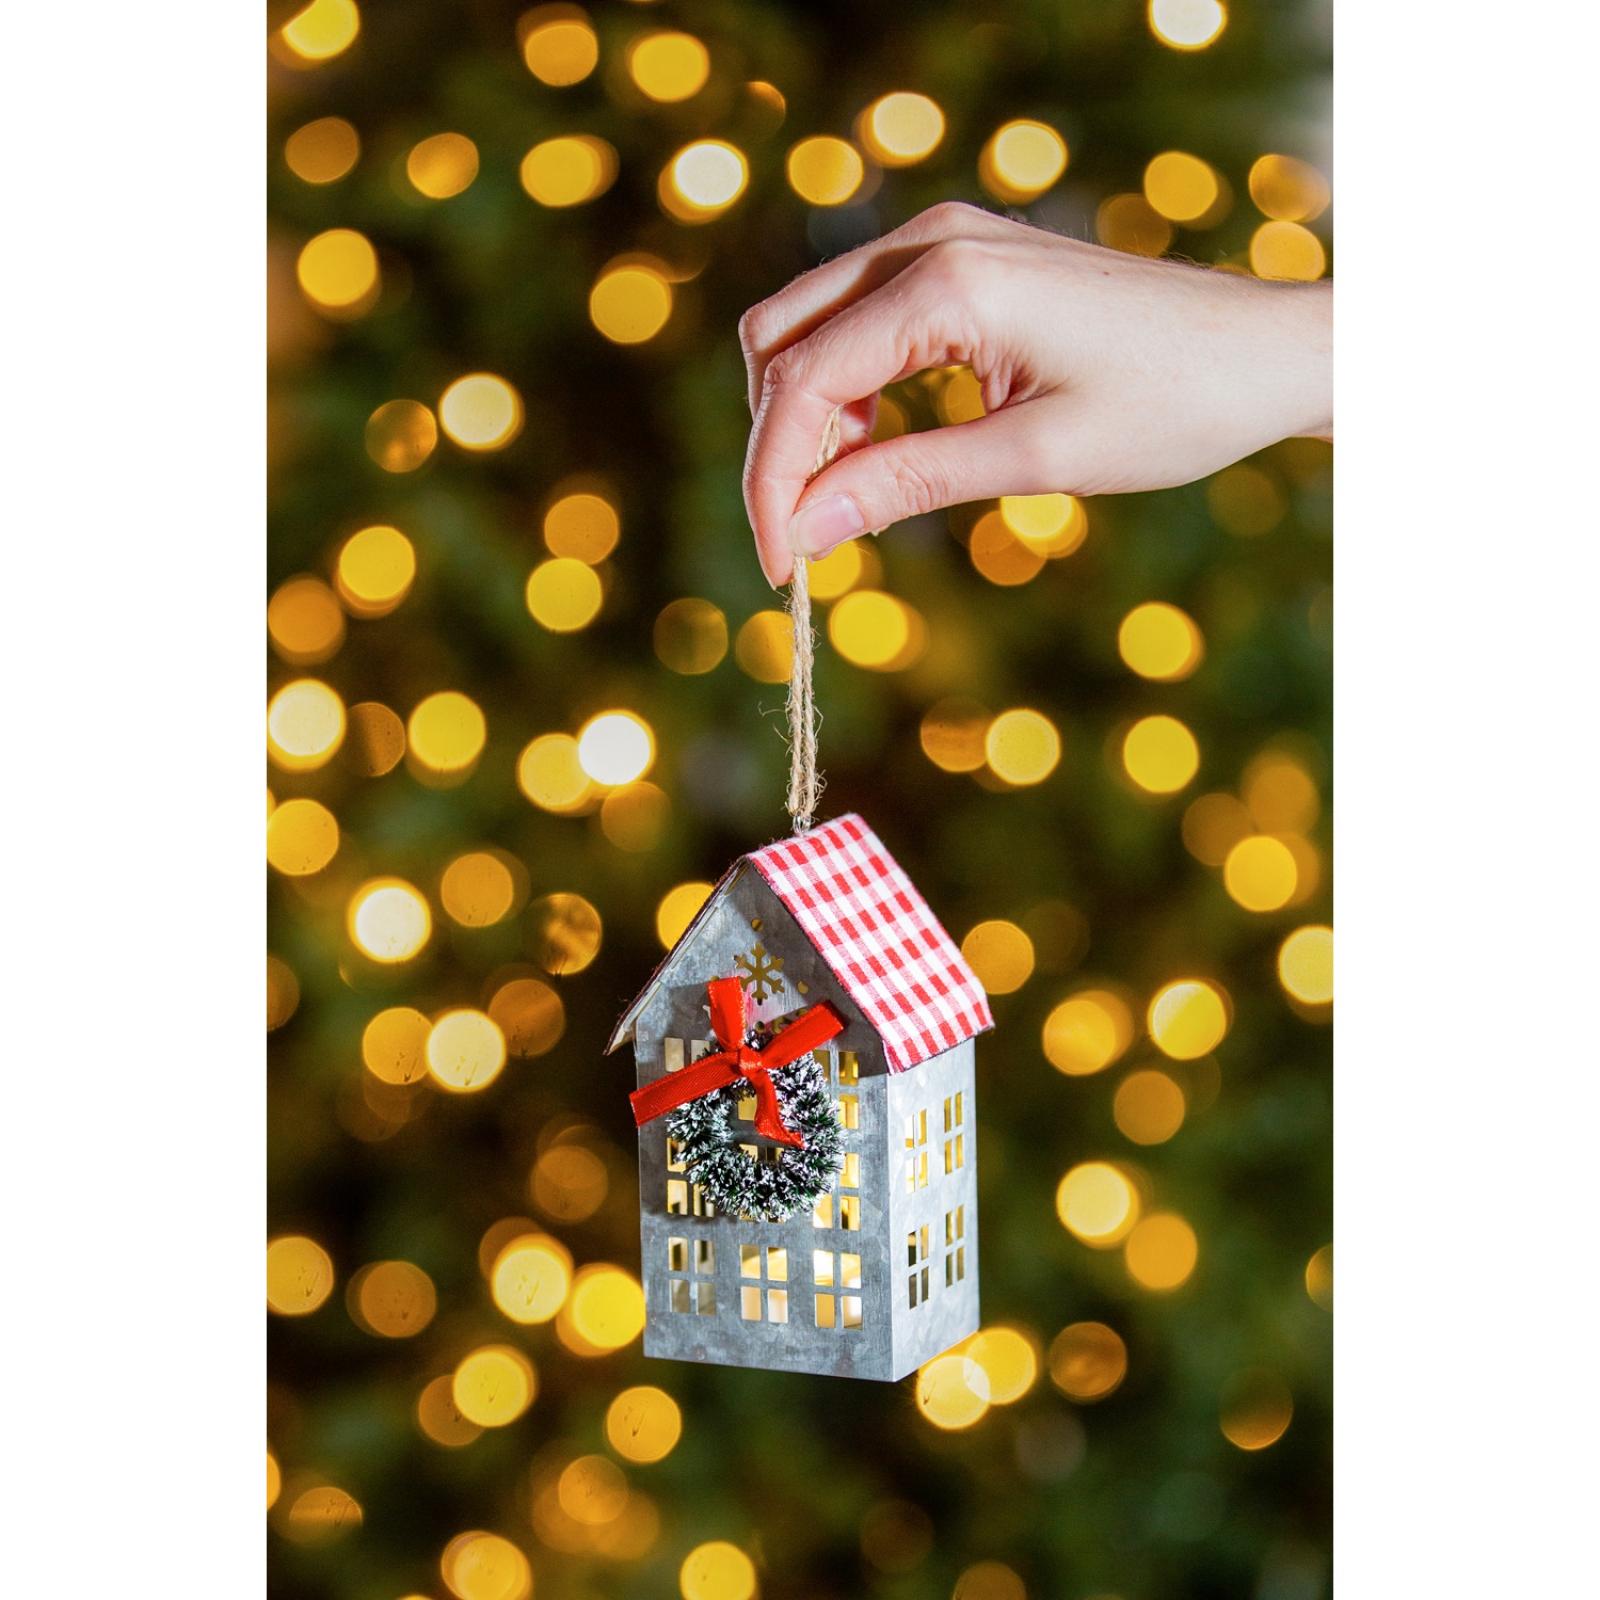 Evergreen Enterprises Assorted Metal LED House Ornament Red Roof